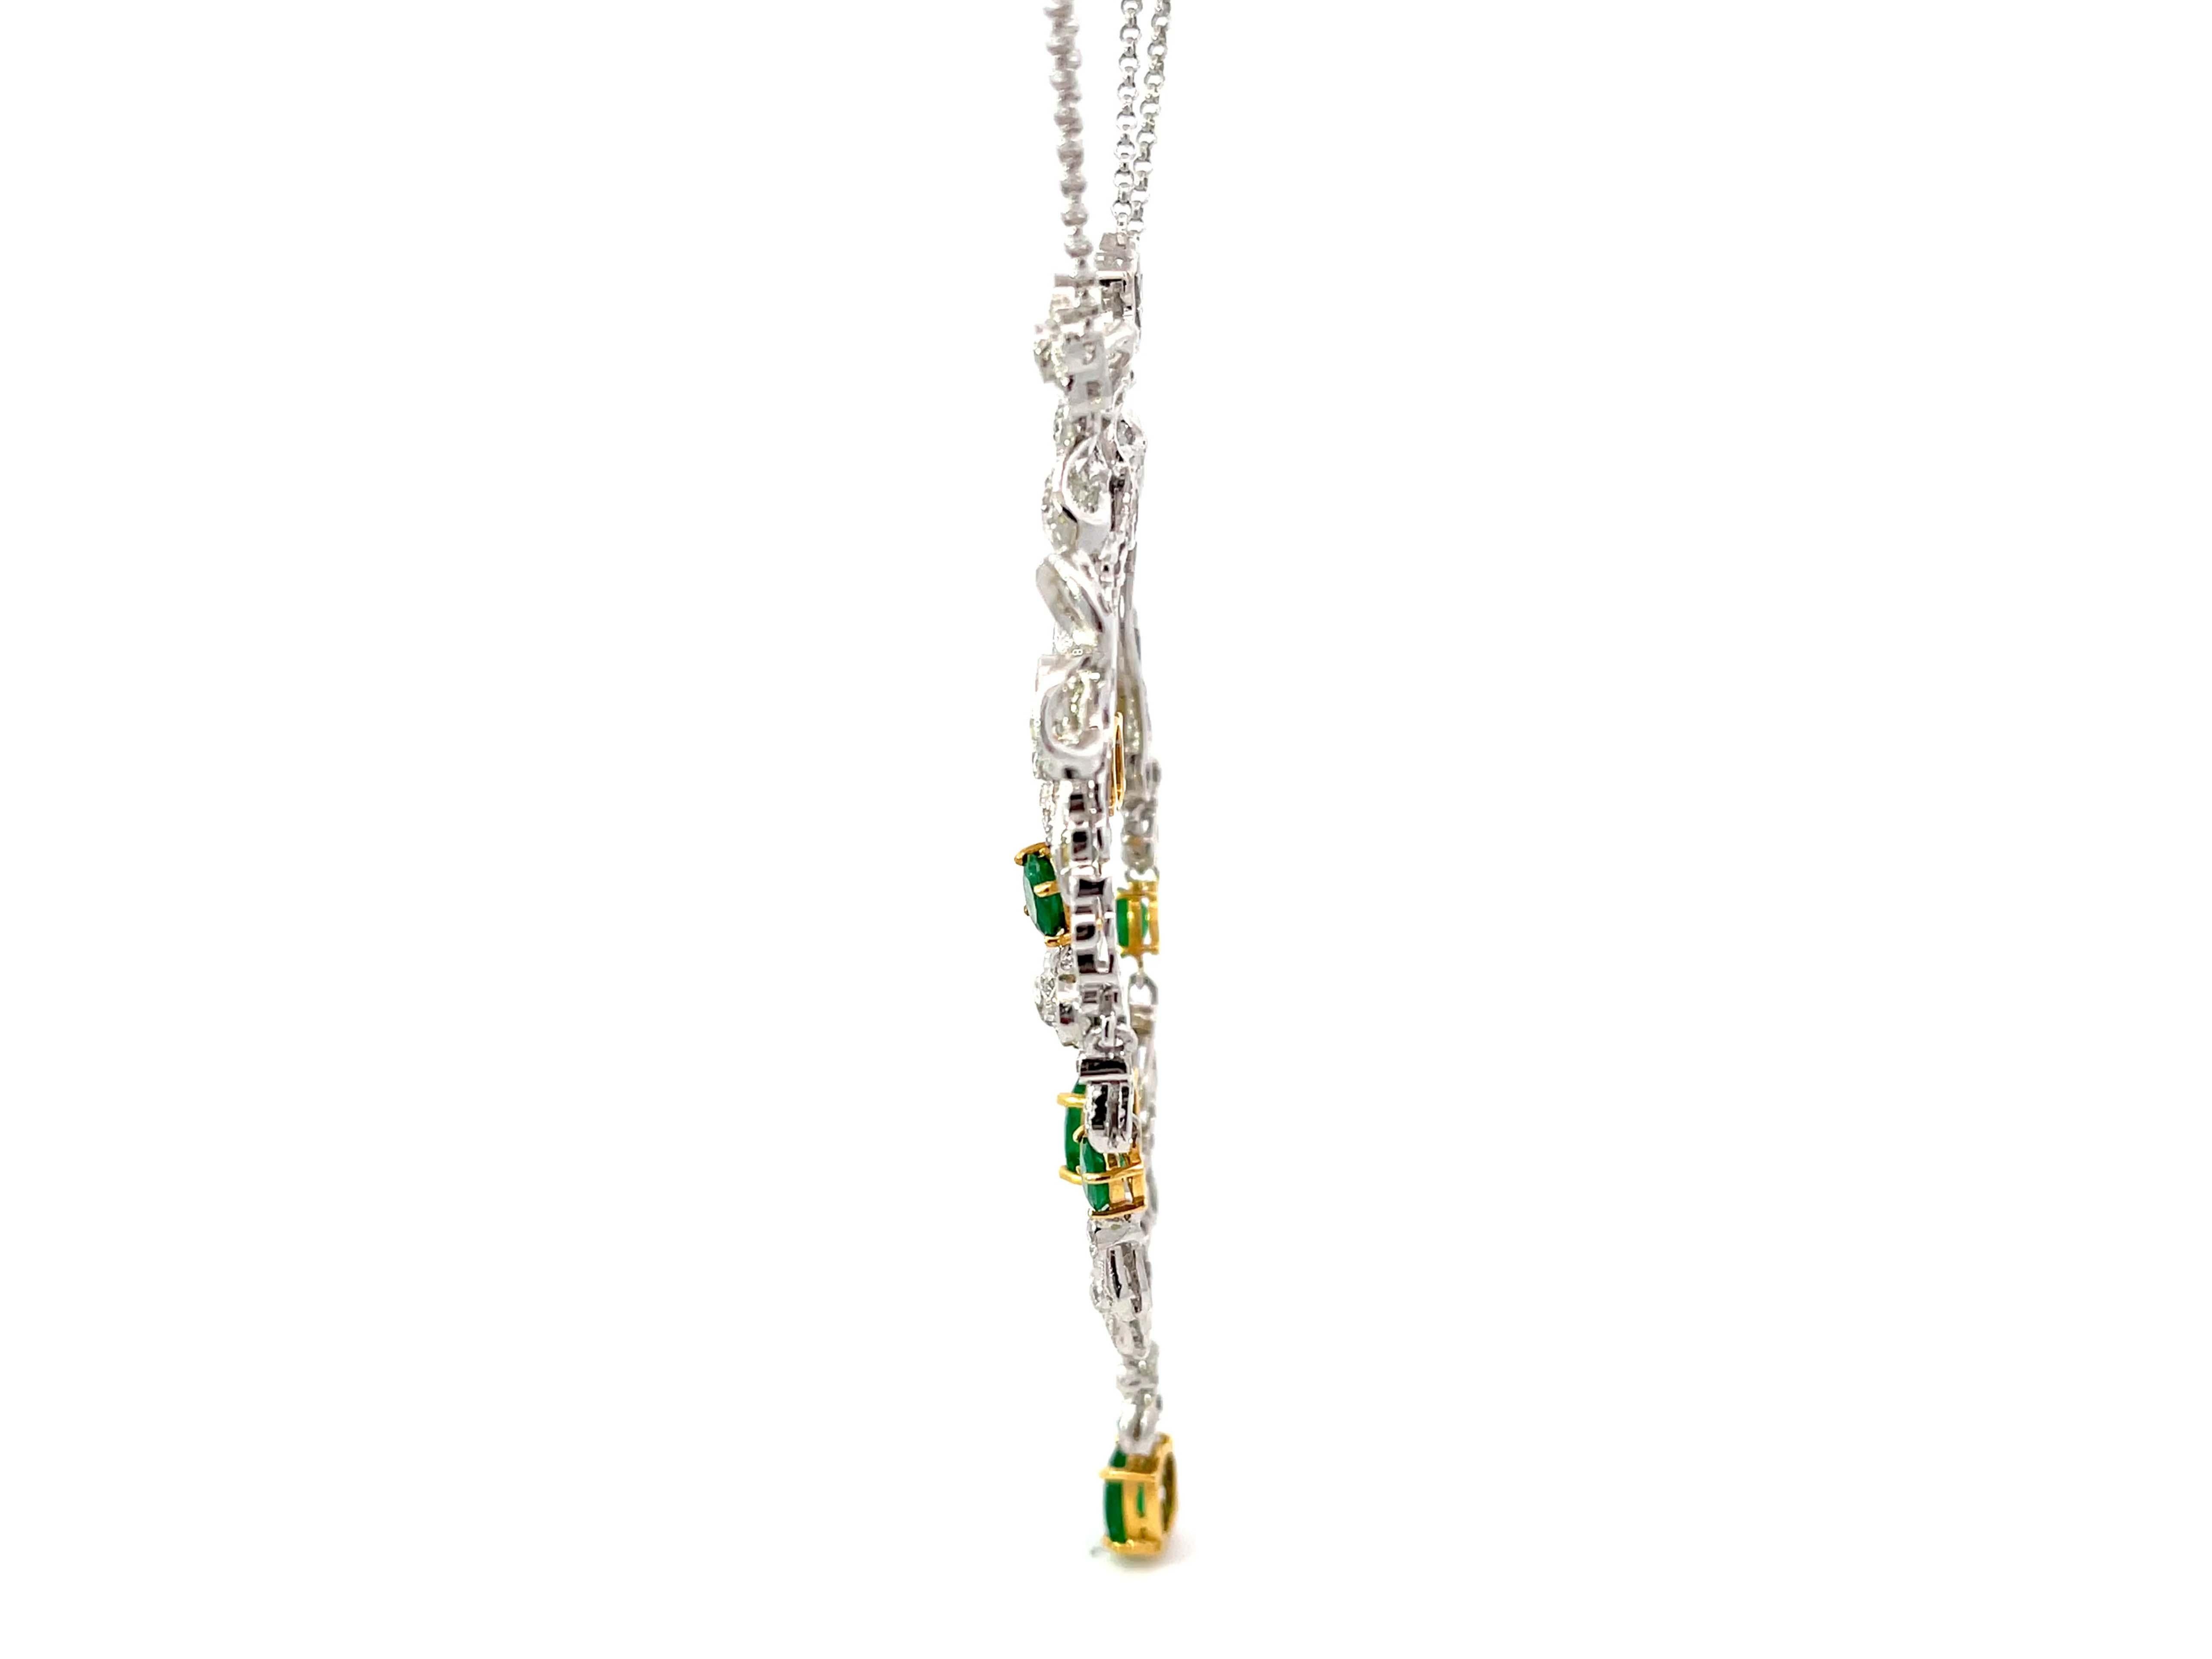 Victorian Diamond and Emerald Dangly Pendant Necklace in 18k White Gold In Excellent Condition For Sale In Honolulu, HI